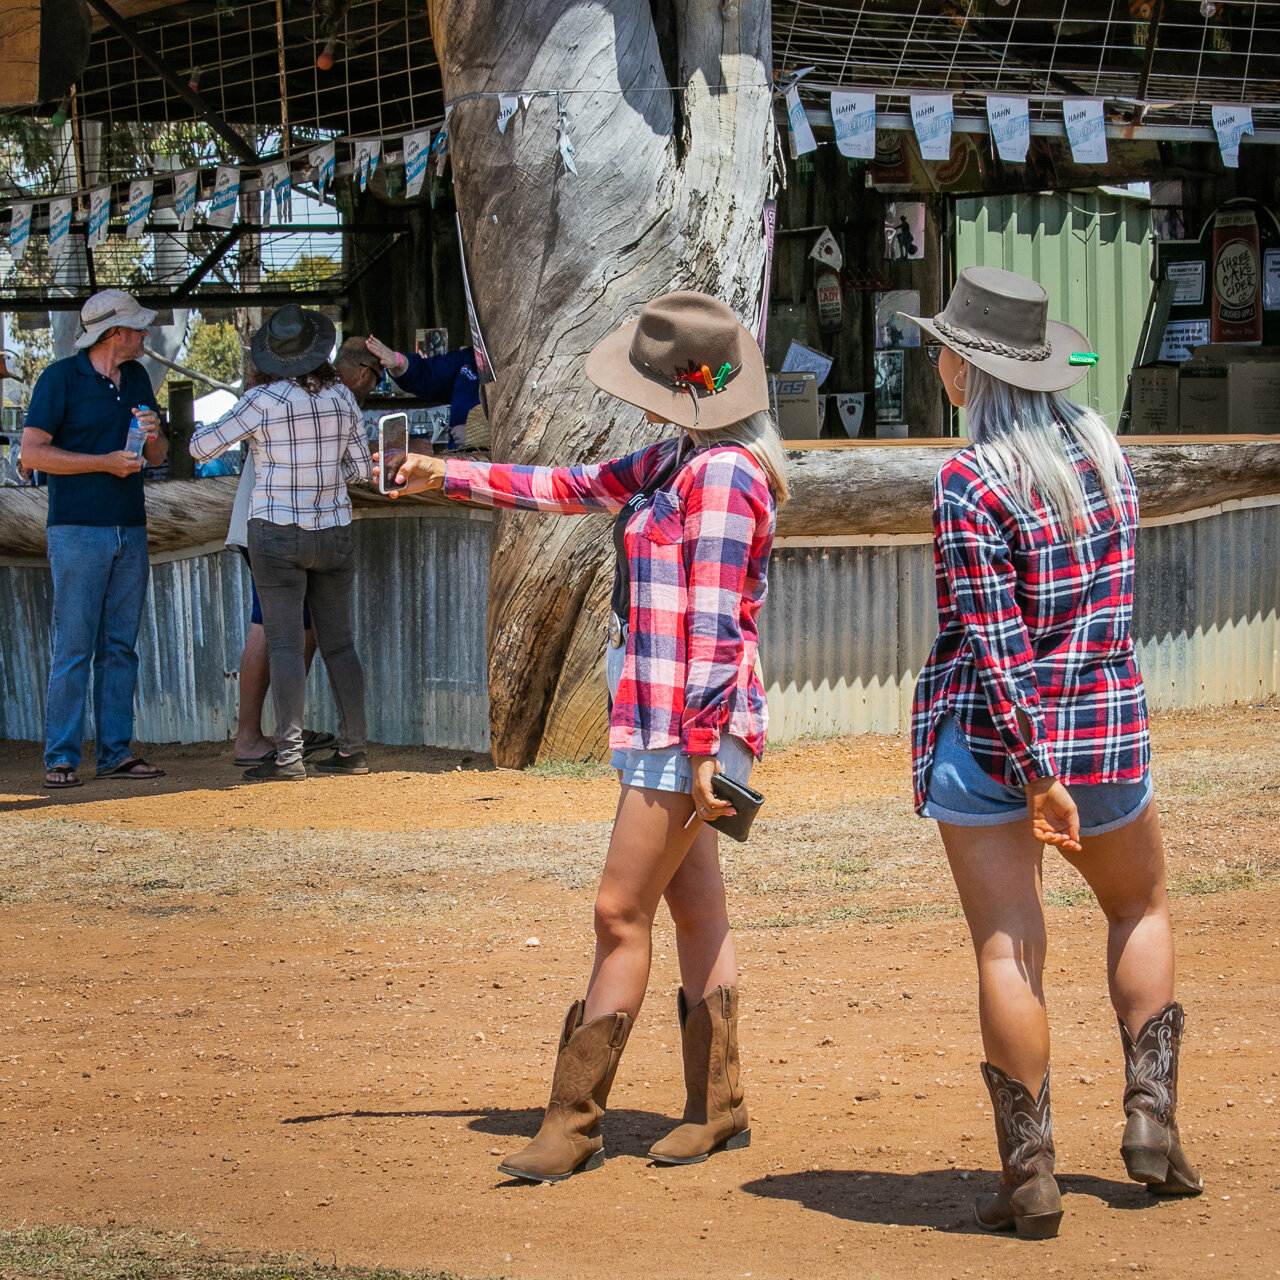 Cowgirl selfies at the annual Boyup Brook Rodeo in the south west of WA